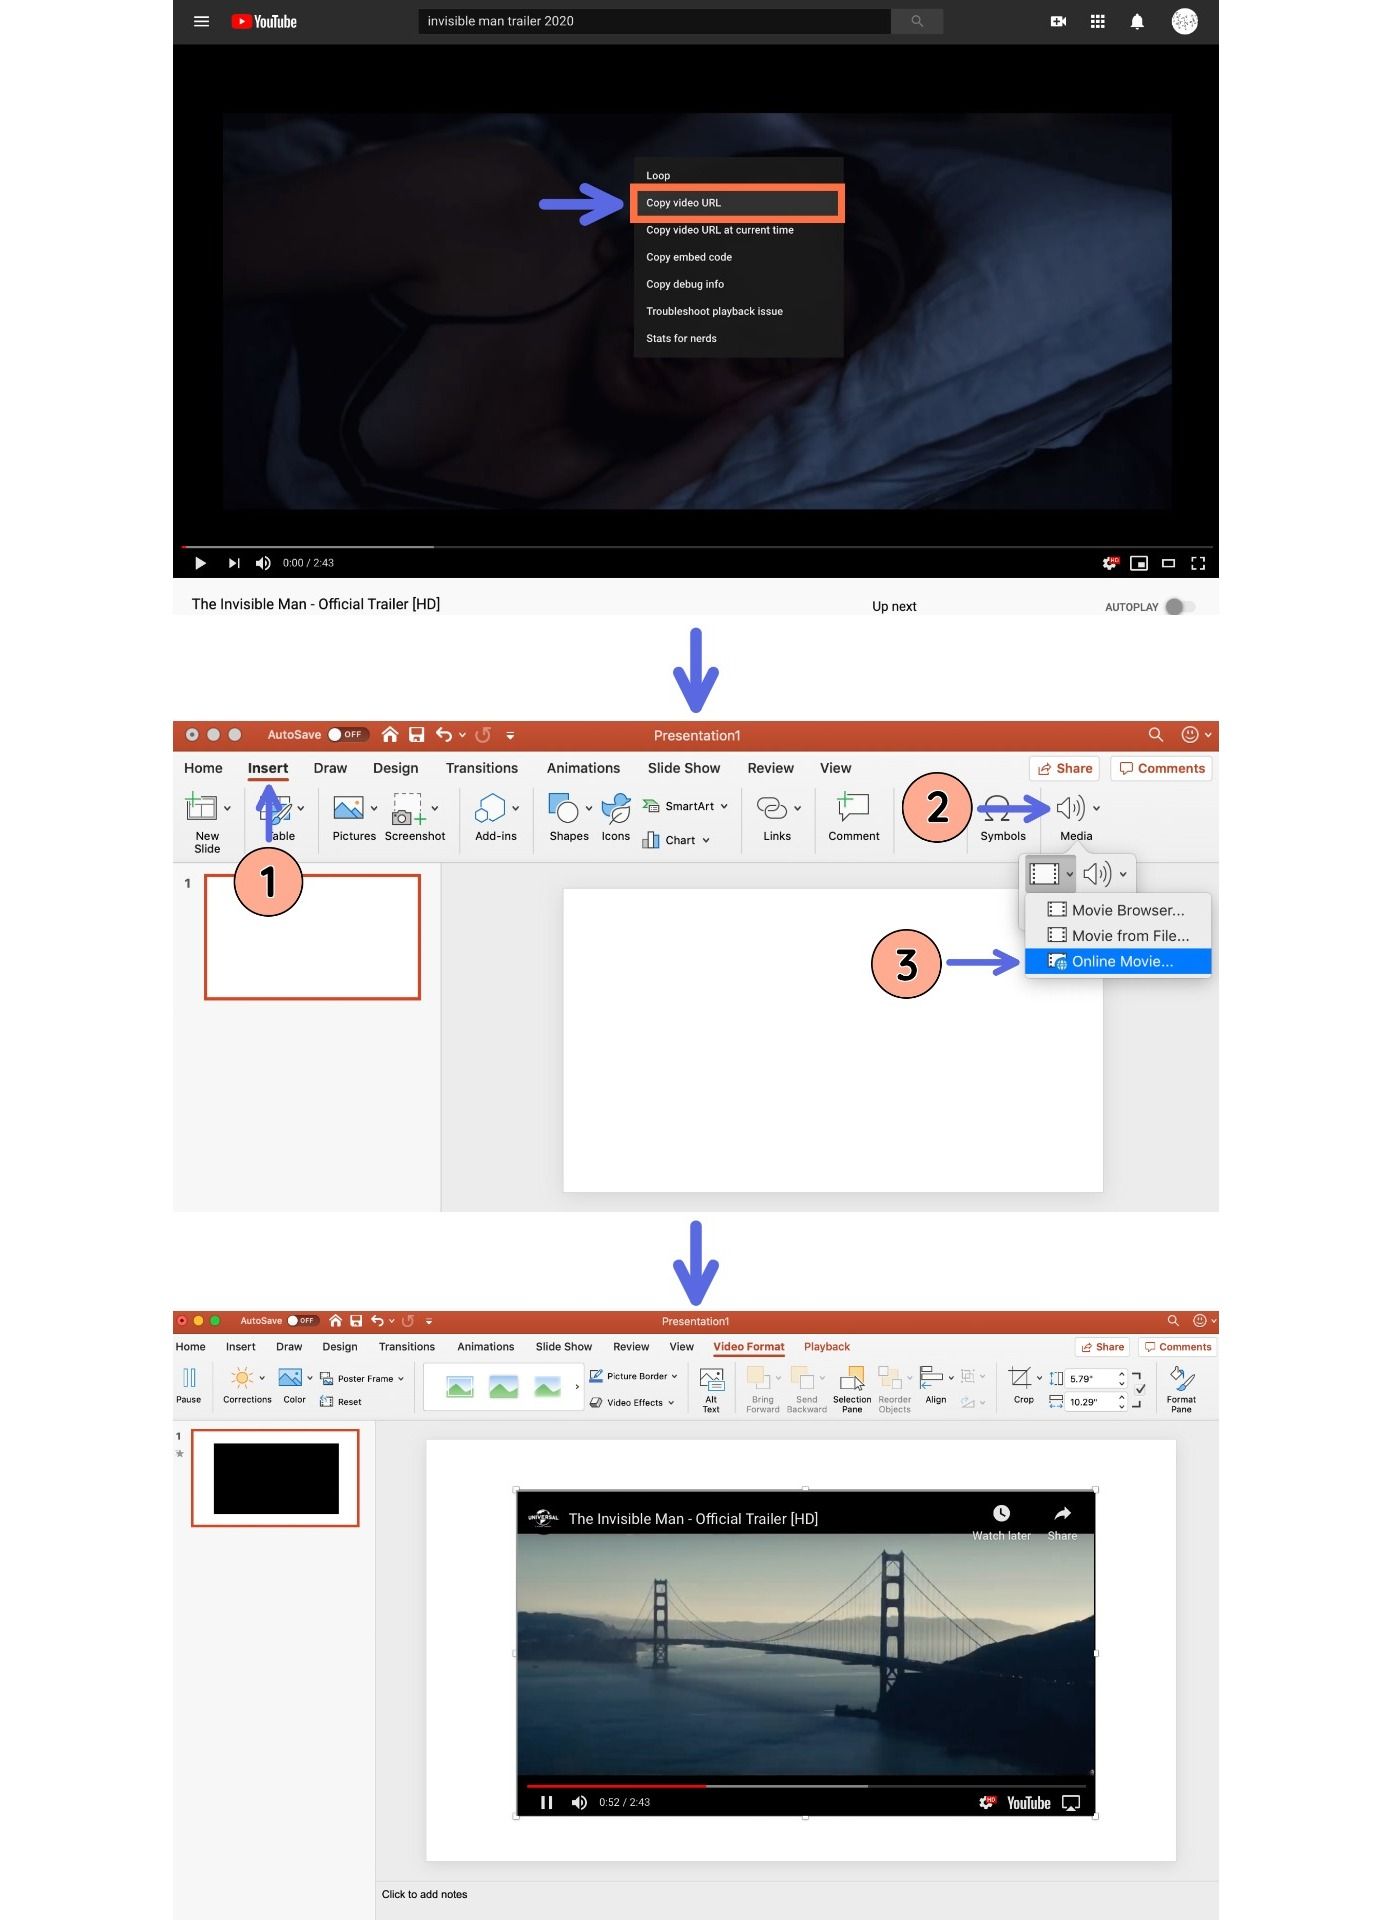 A screenshot showing how to embed videos from the web into PowerPoint. 